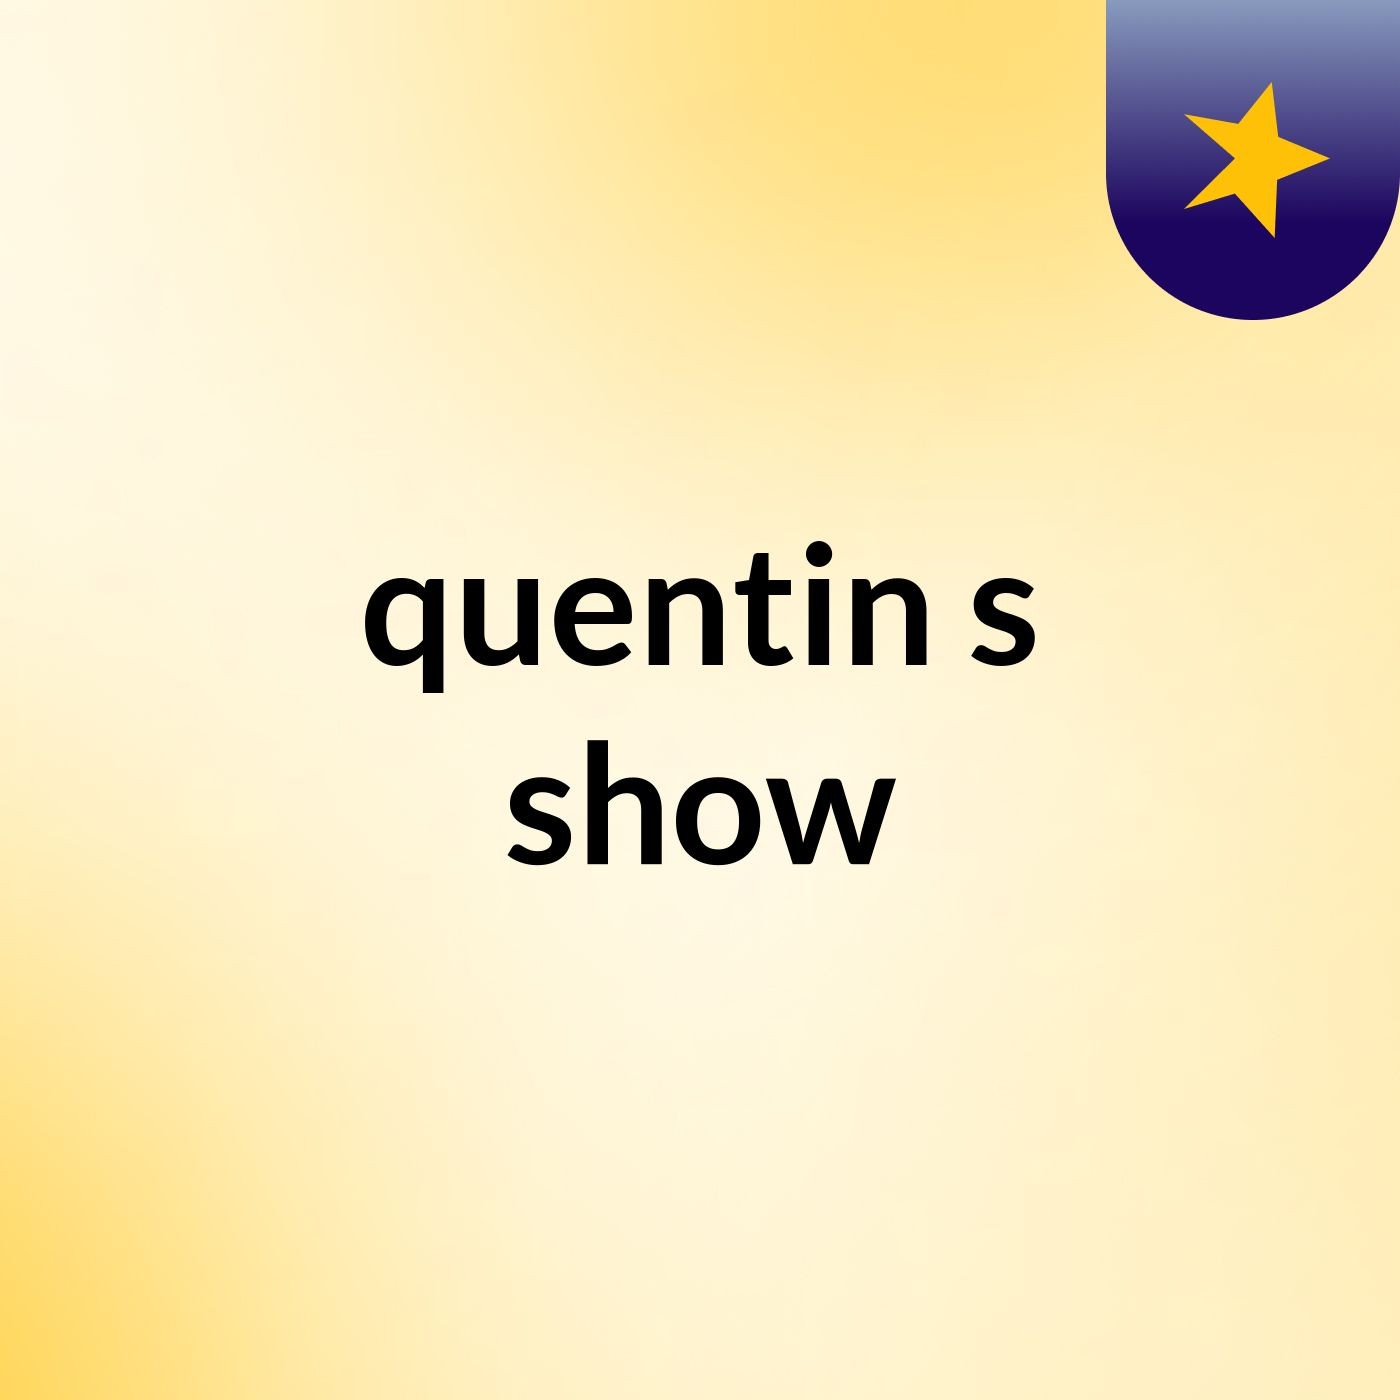 quentin's show